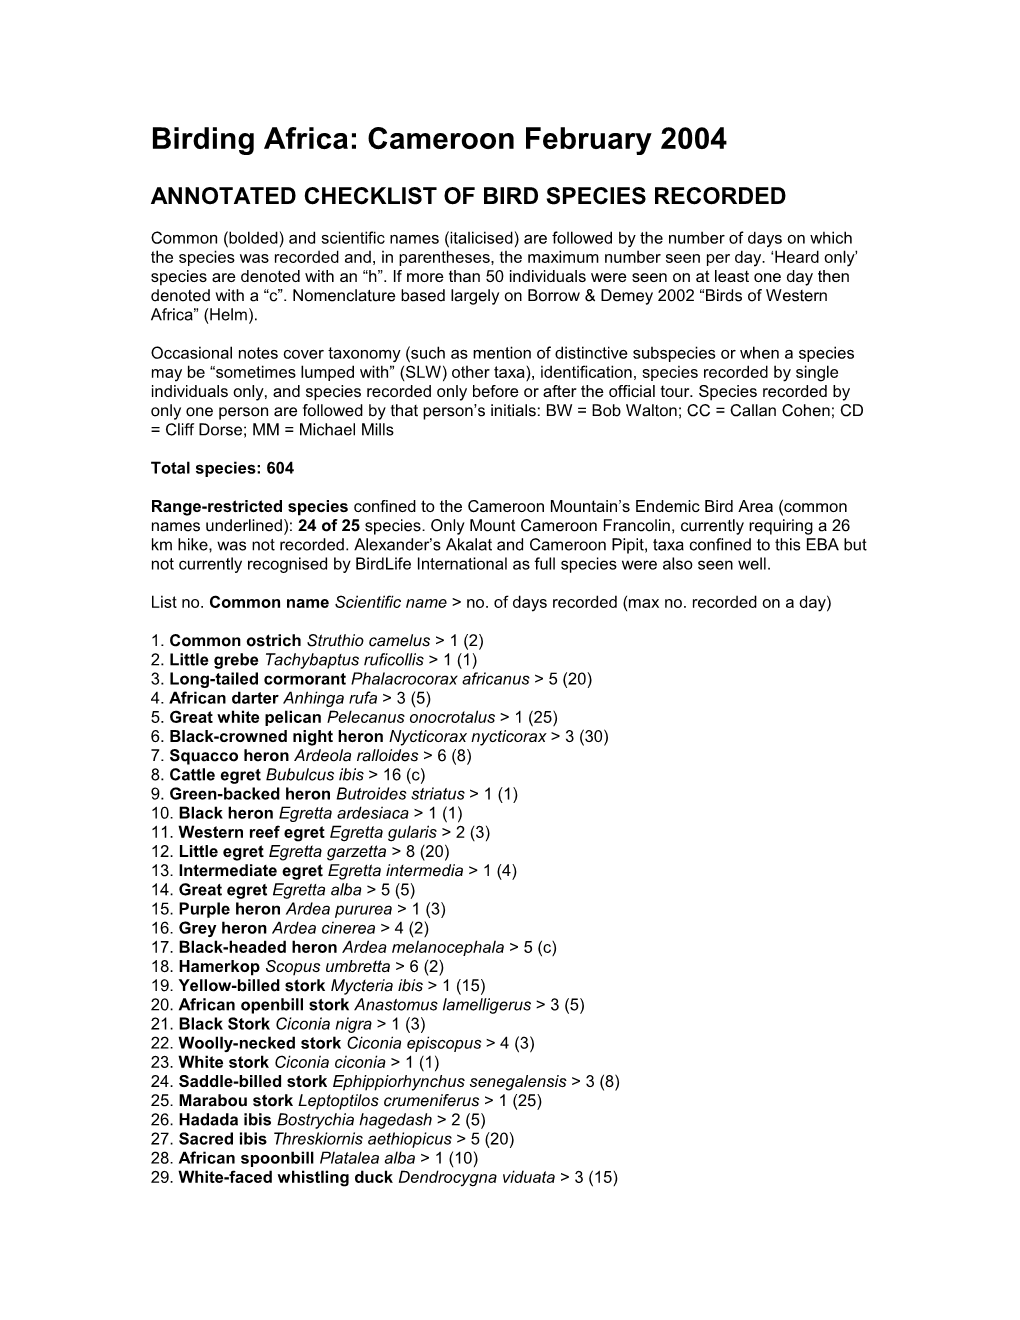 Annotated Checklist of Bird Species Recorded